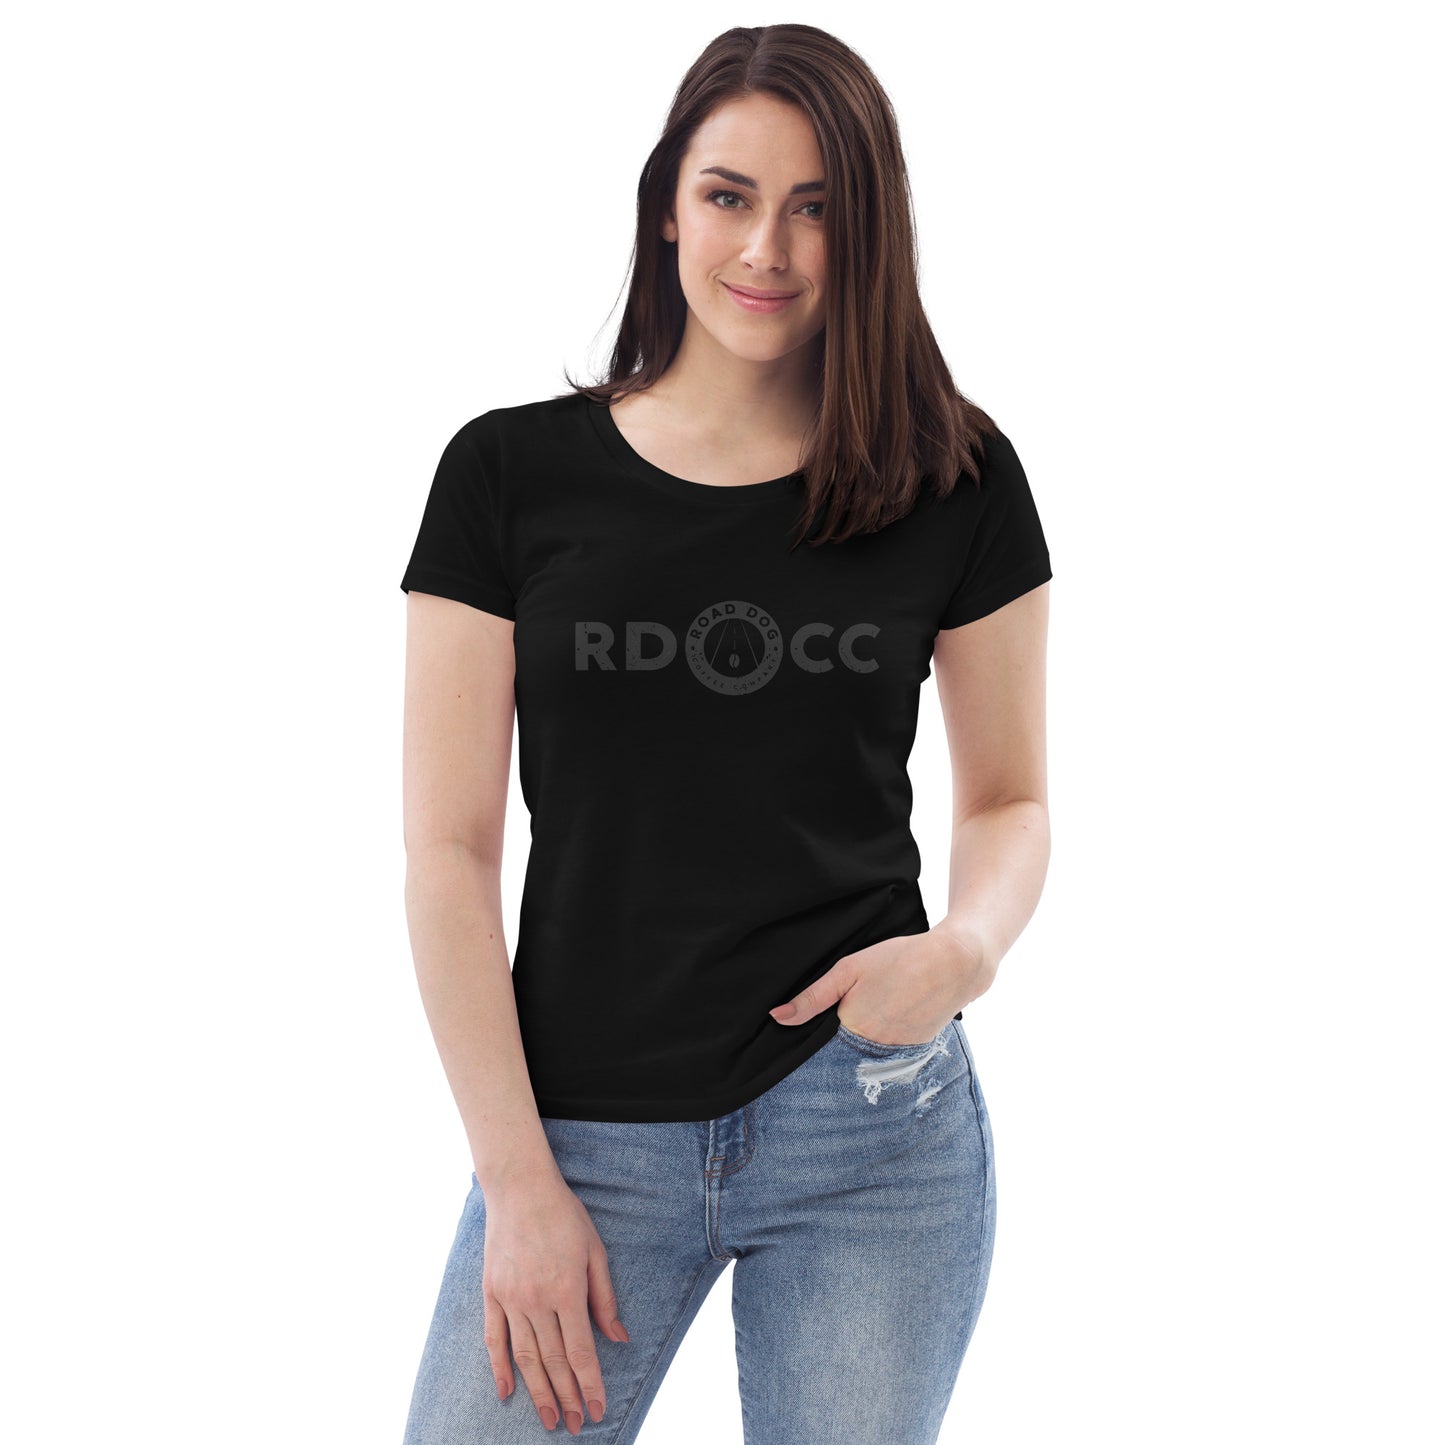 WOMEN'S FITTED RDCC/MEDALLION TEE